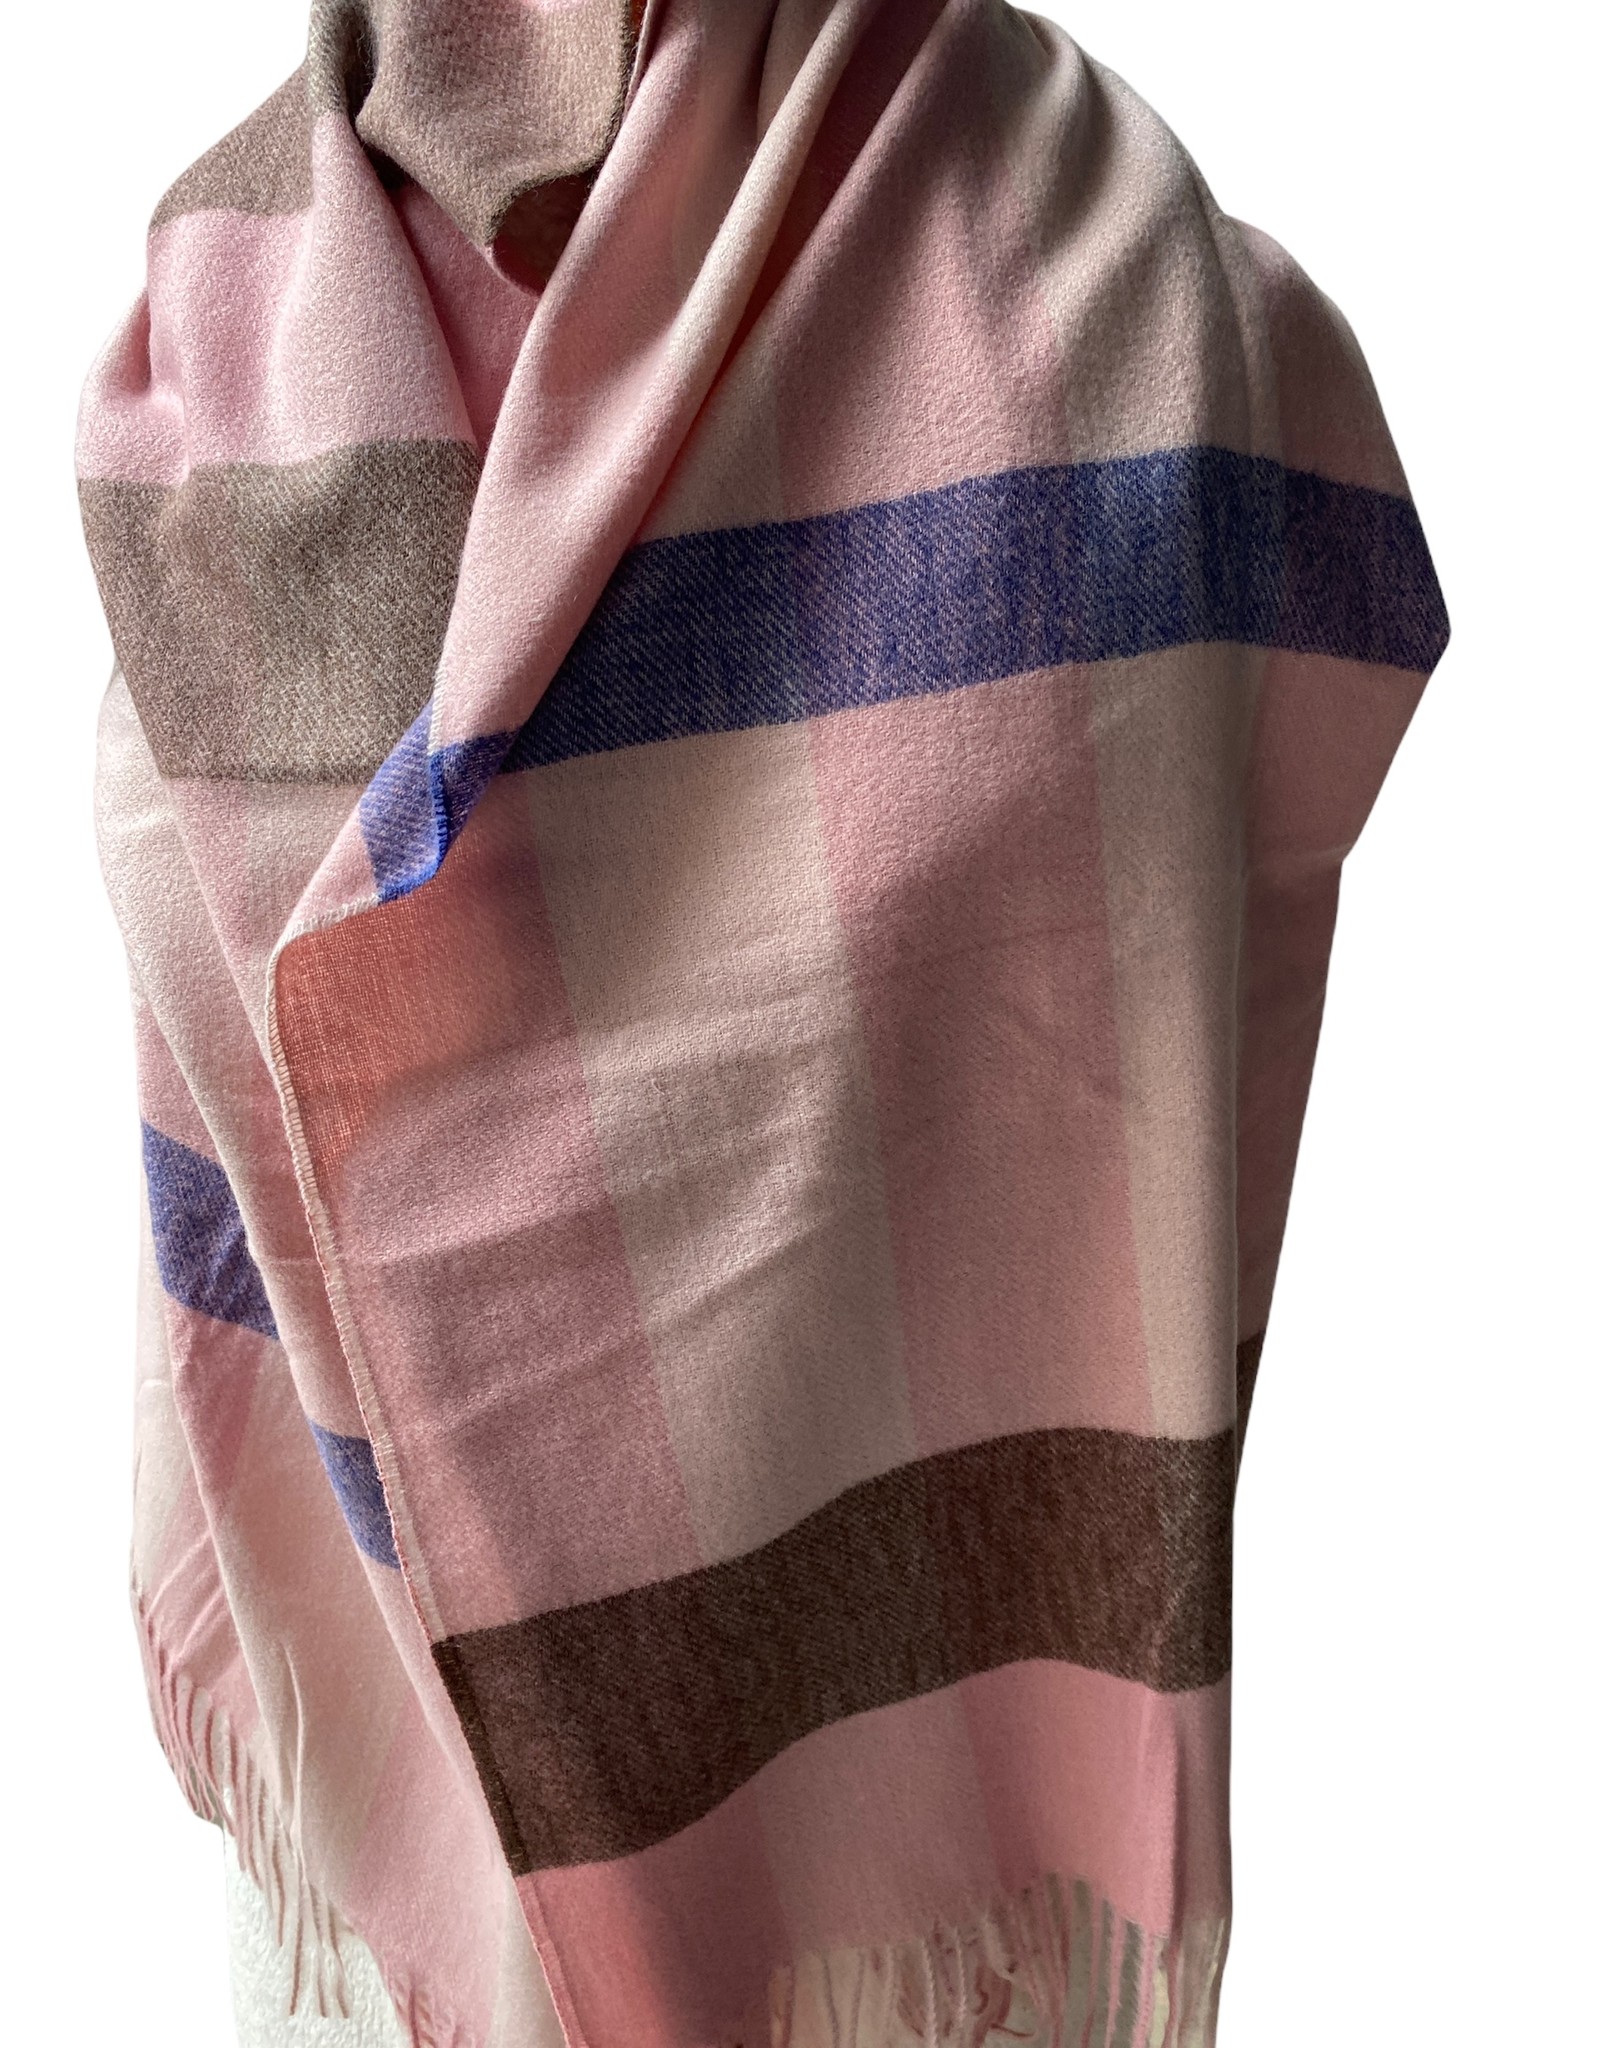 Soft scarf with pink, purple, beige and brown with fringles